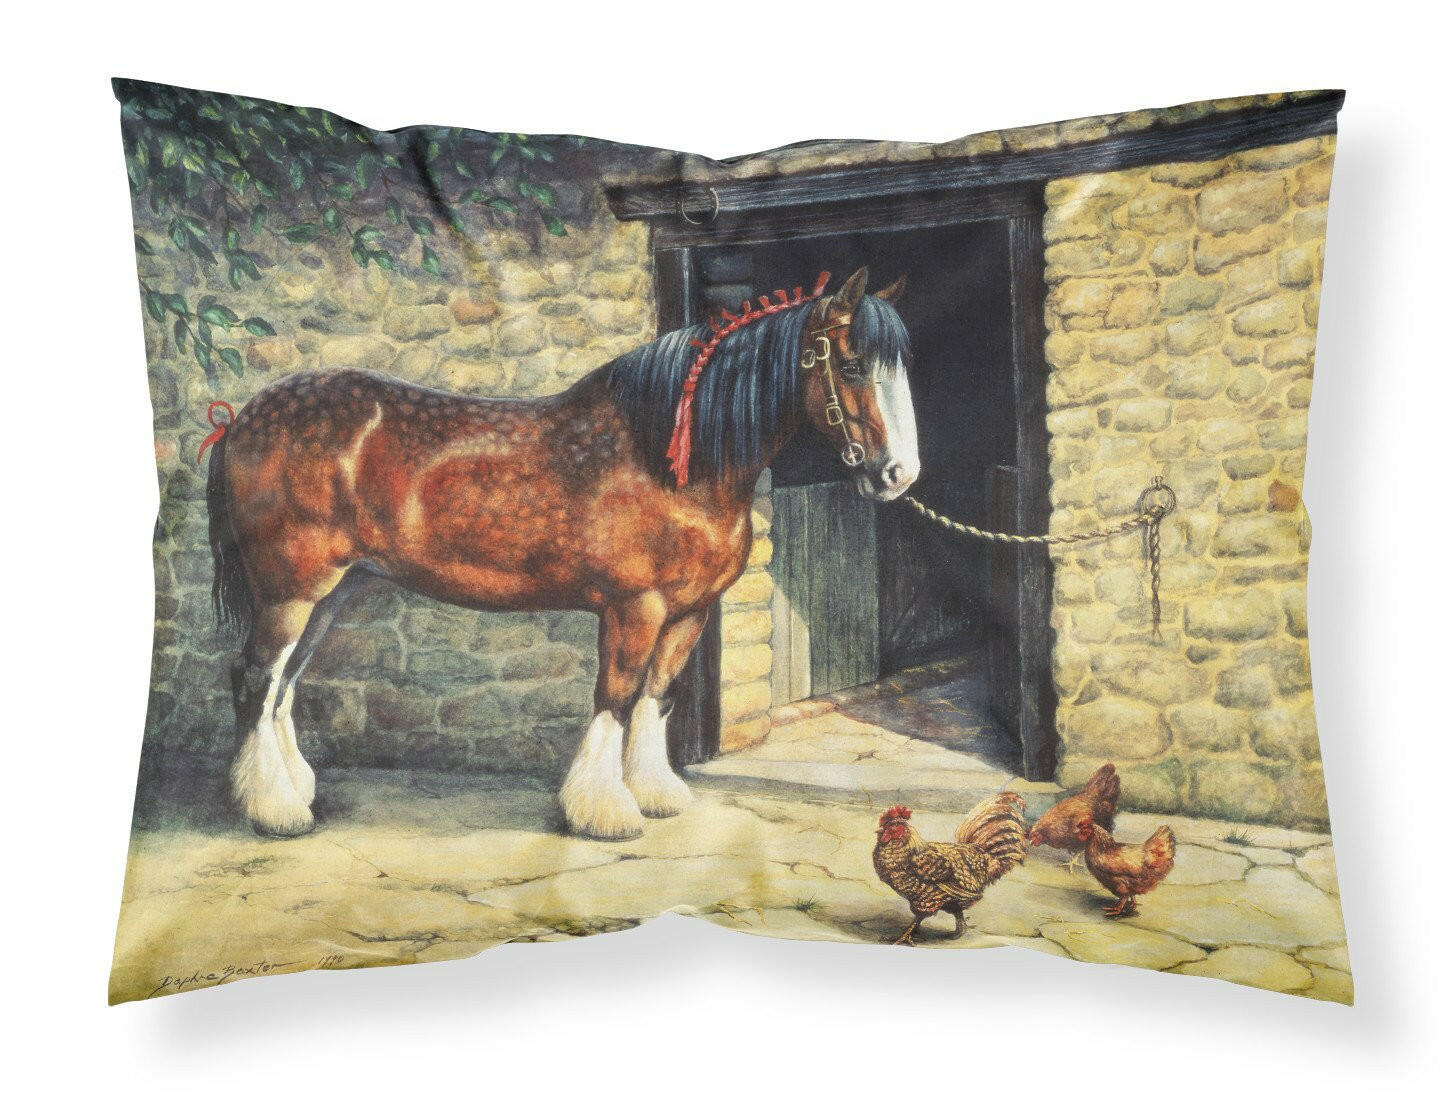 Horse and Chickens by Daphne Baxter Fabric Standard Pillowcase BDBA0087PILLOWCASE by Caroline's Treasures